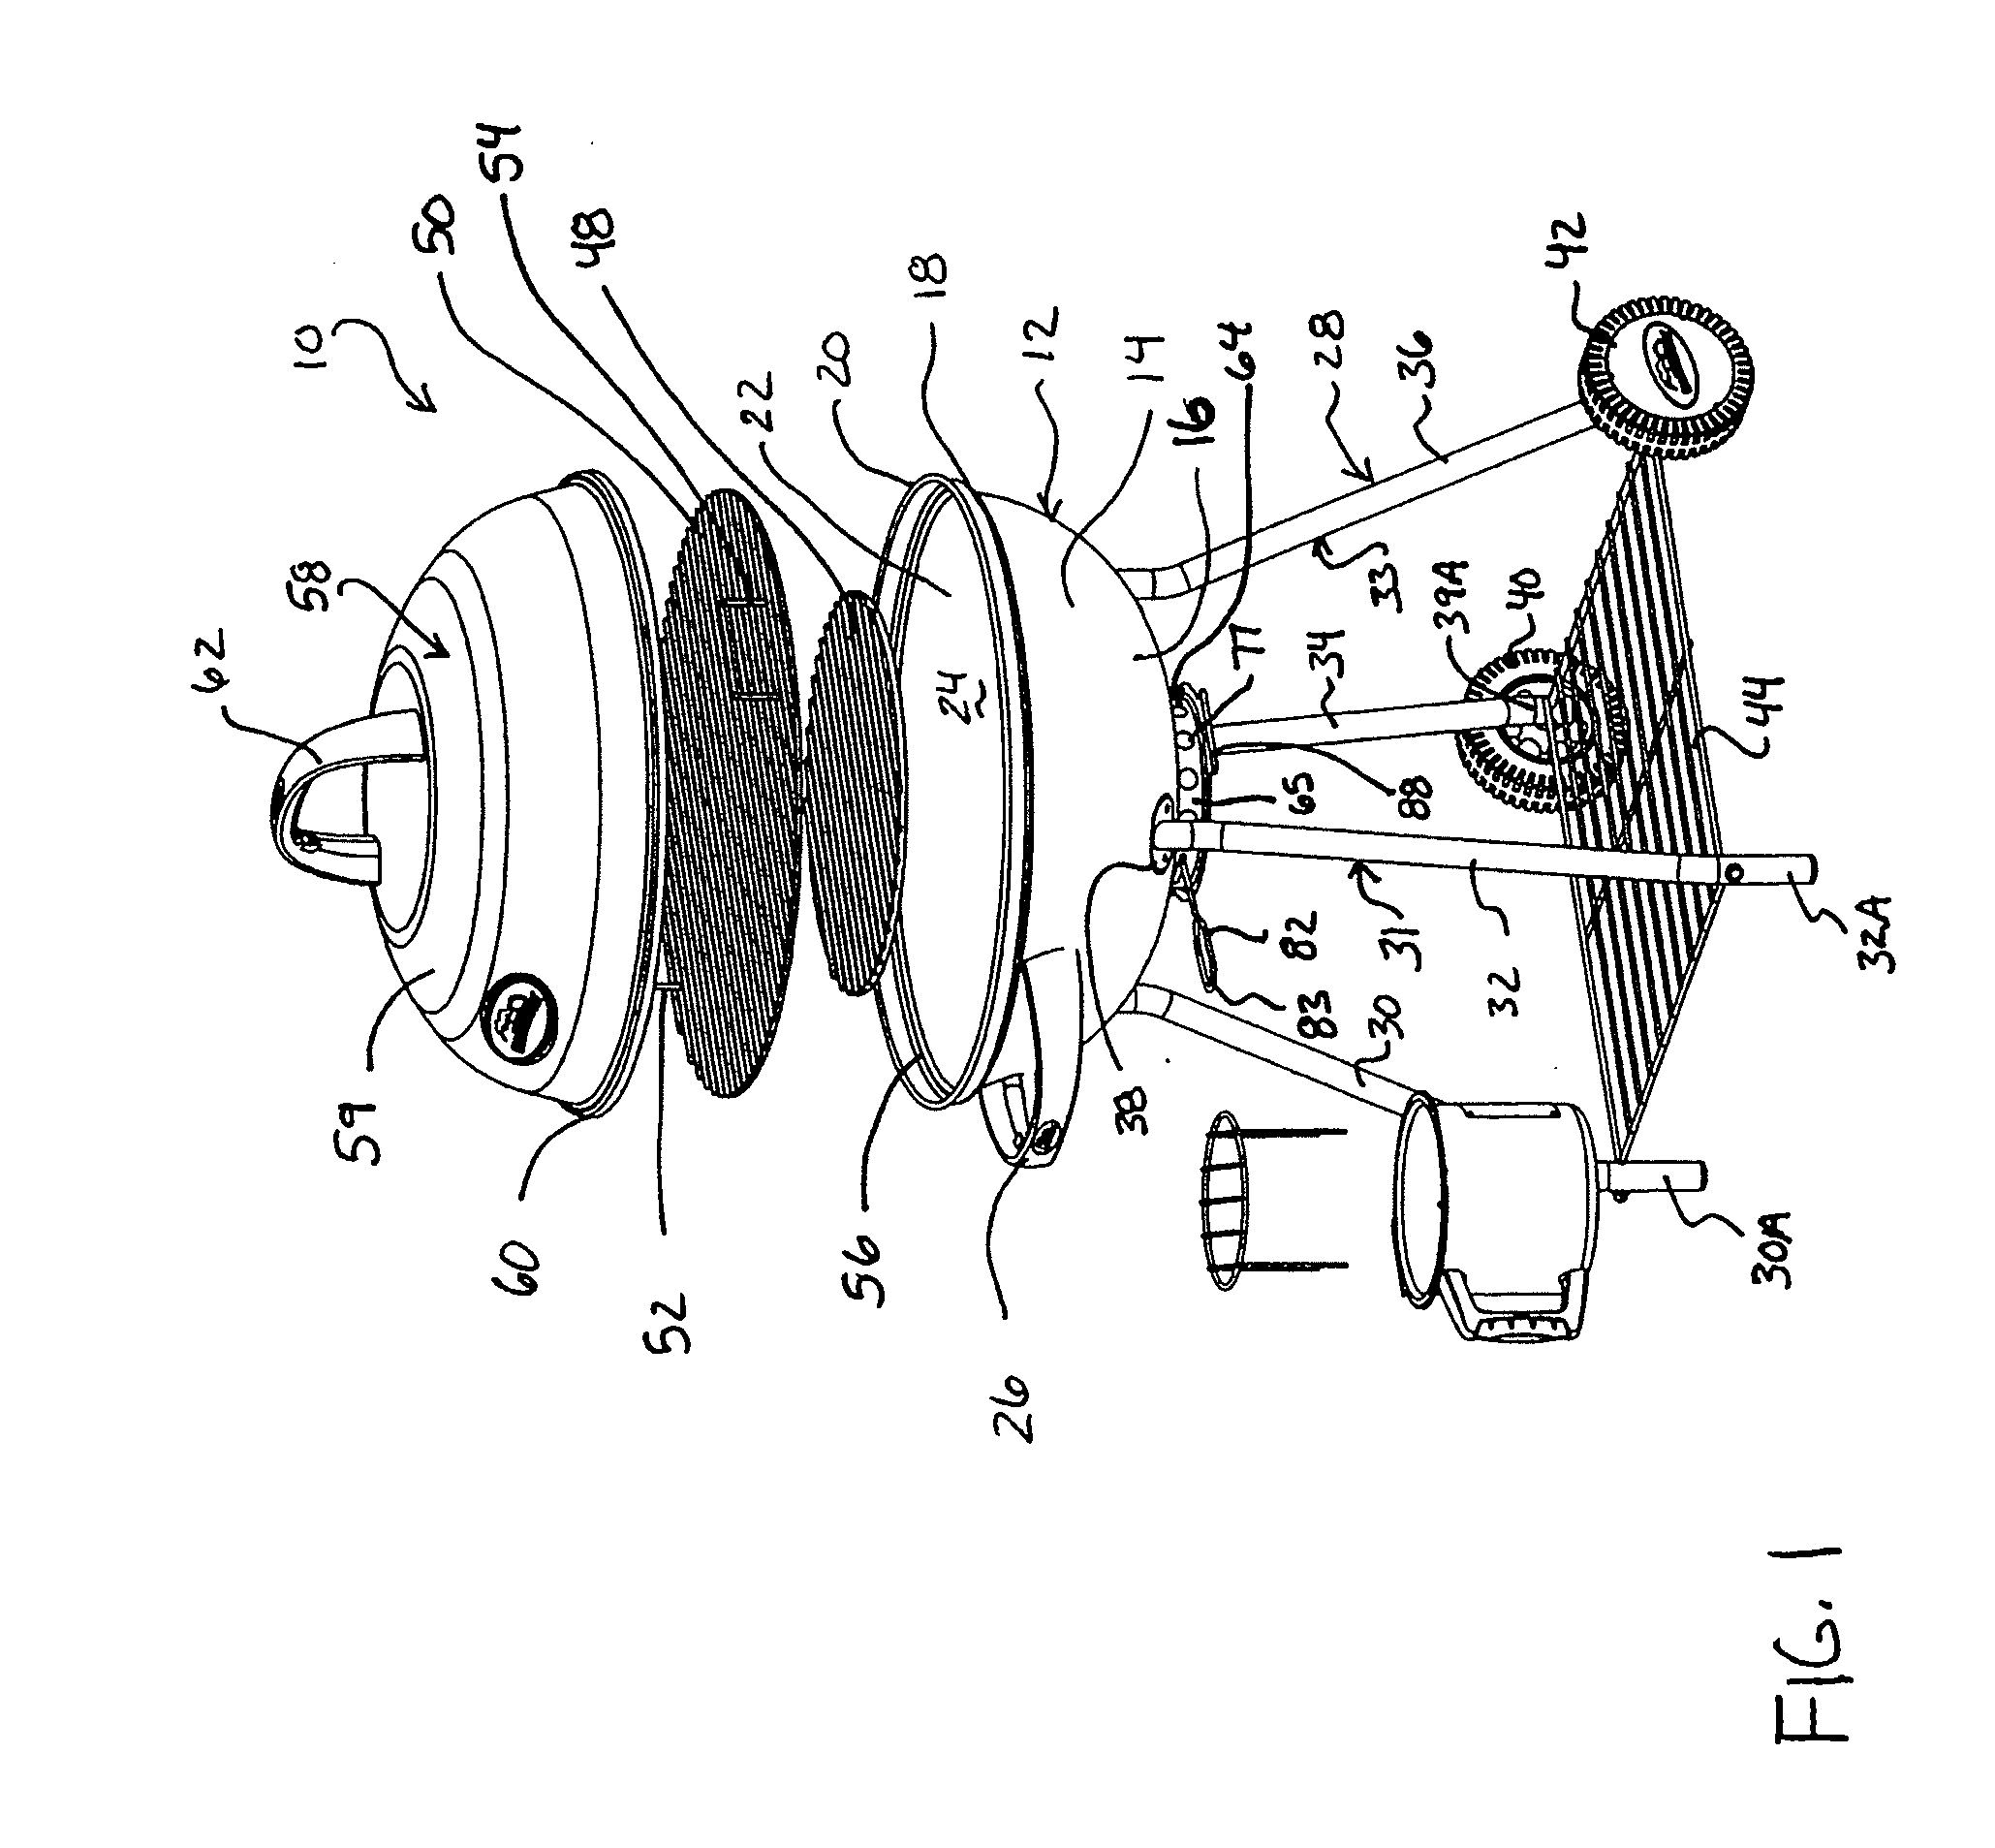 Cooking apparatus with a cooking fuel ignition facilitator and method of assembling and using same